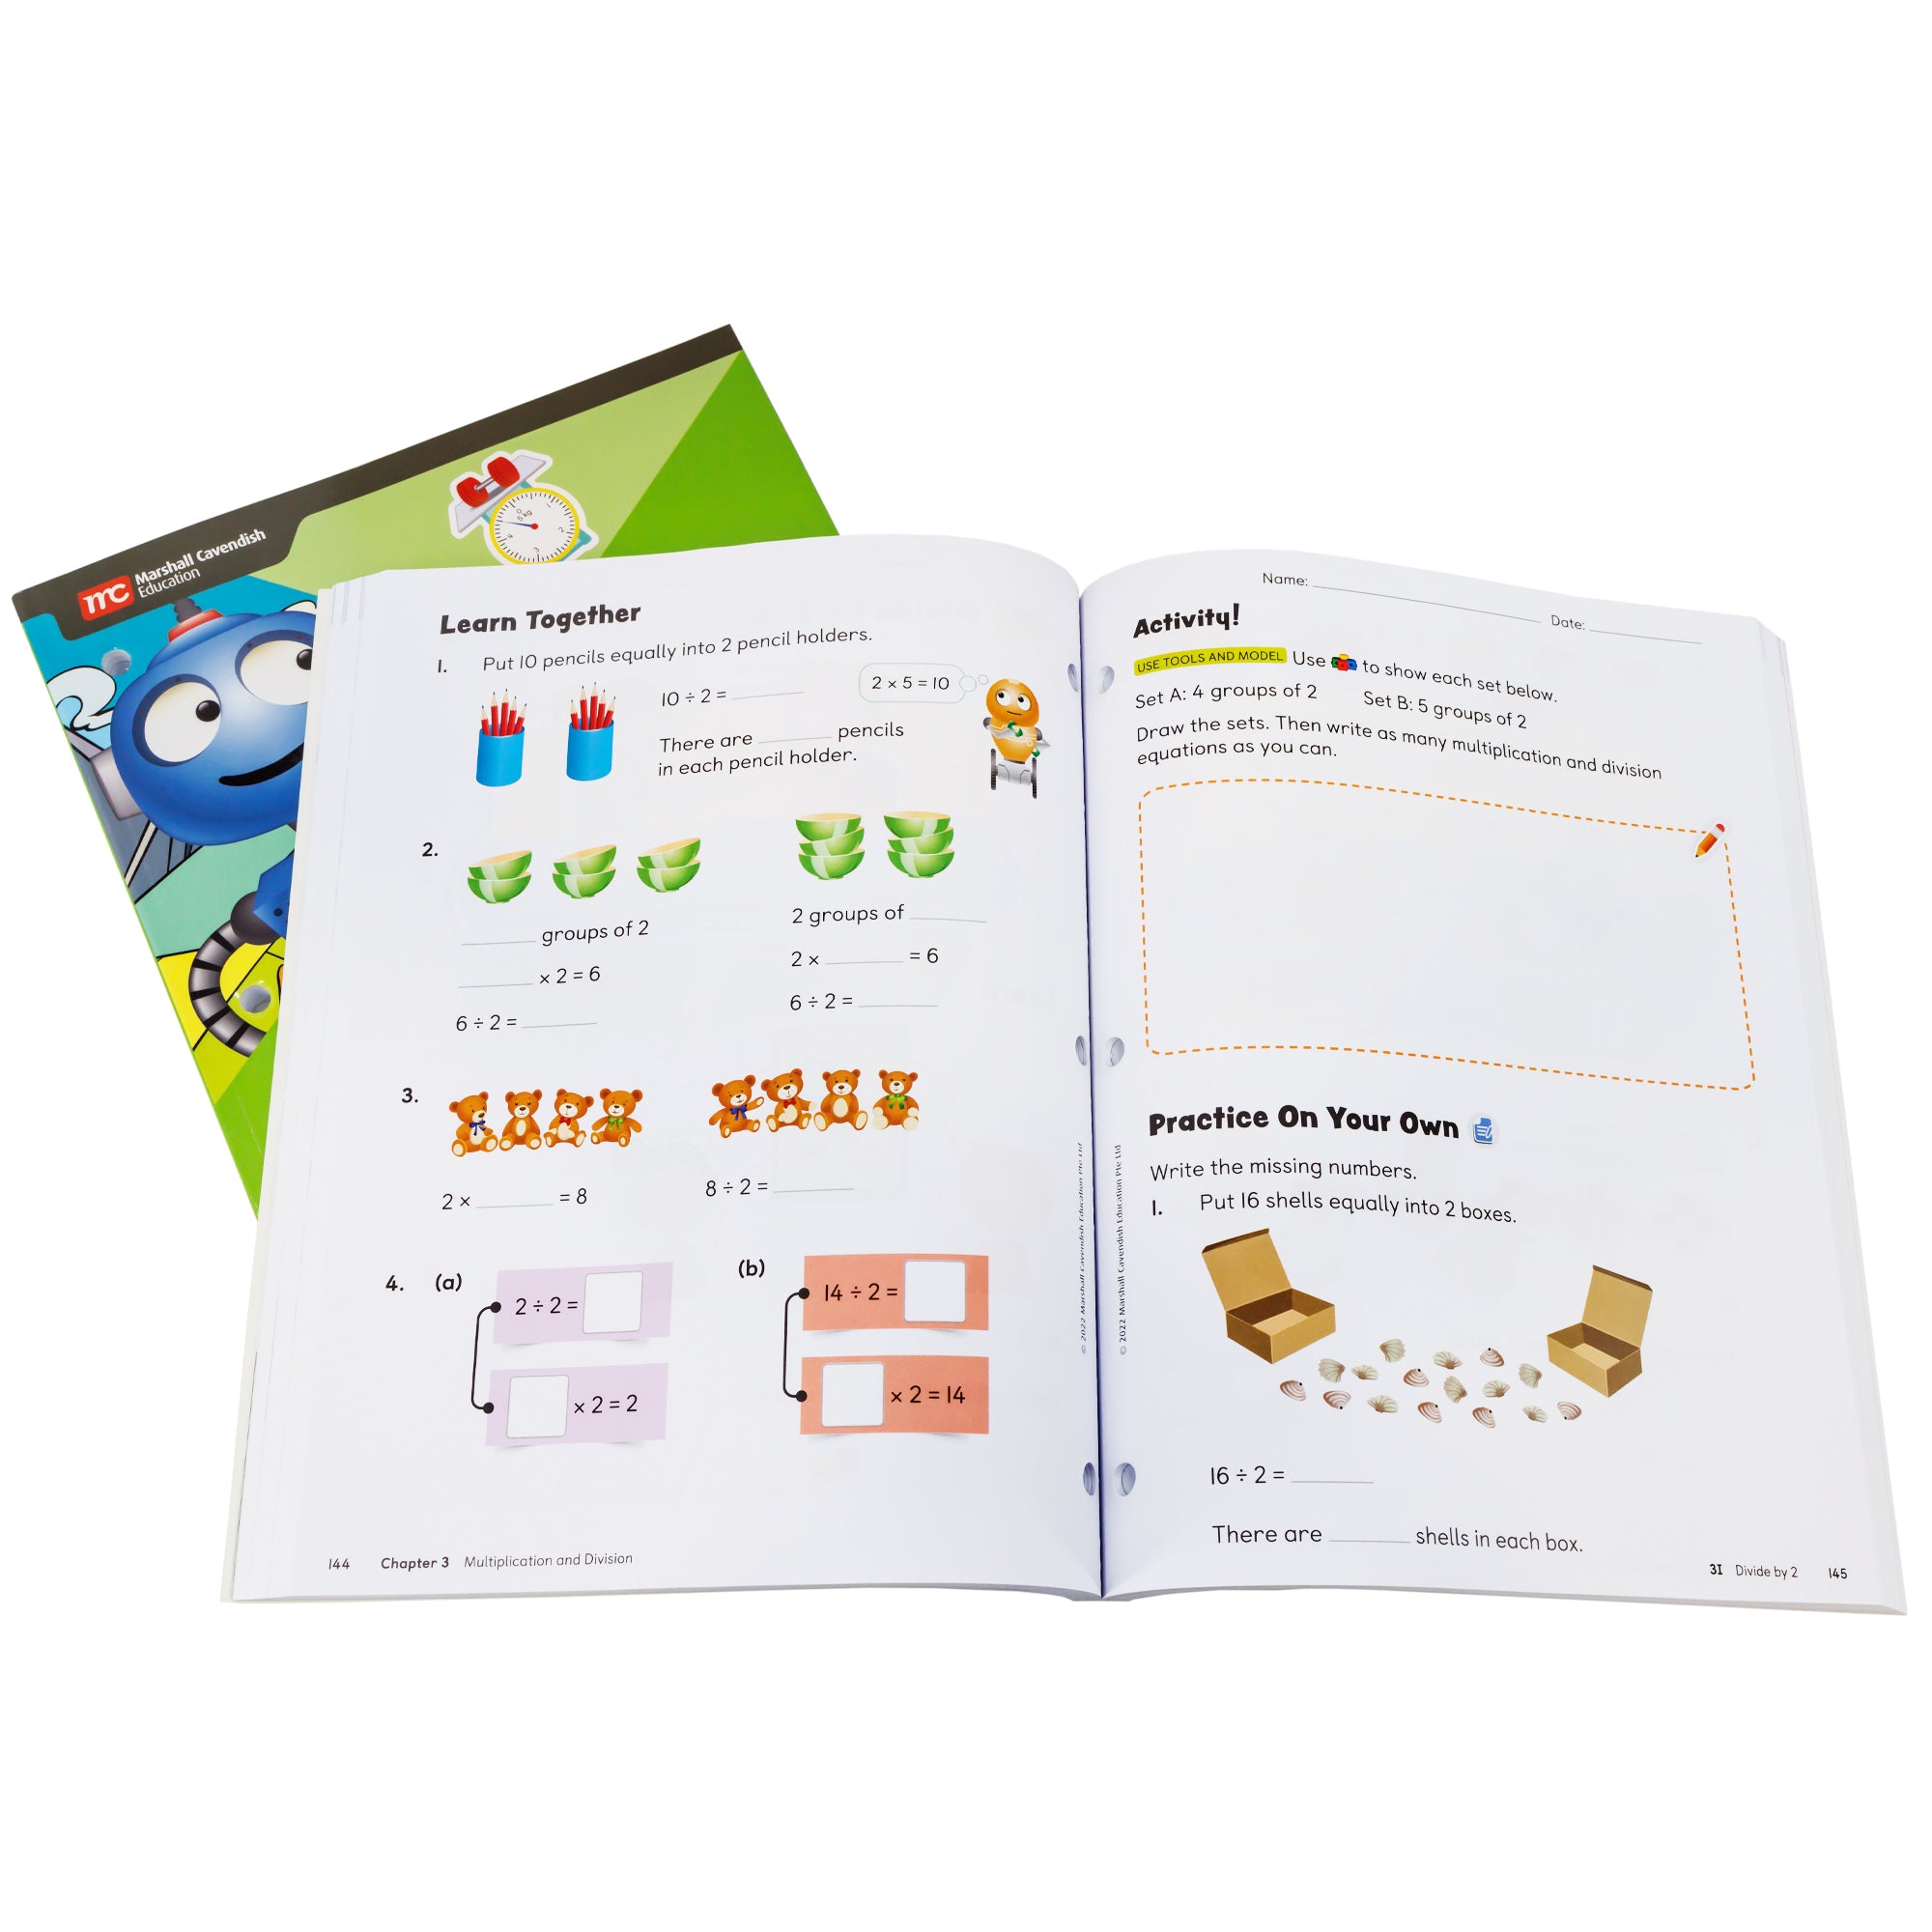 Singapore Primary Math third grade books. On top is an open book showing math problems with illustrations of pencil cups, bowls, teddy bears, a robot, and boxes with sea shells scattered. Under the open book and to the left is a closed book with a robot and green background.